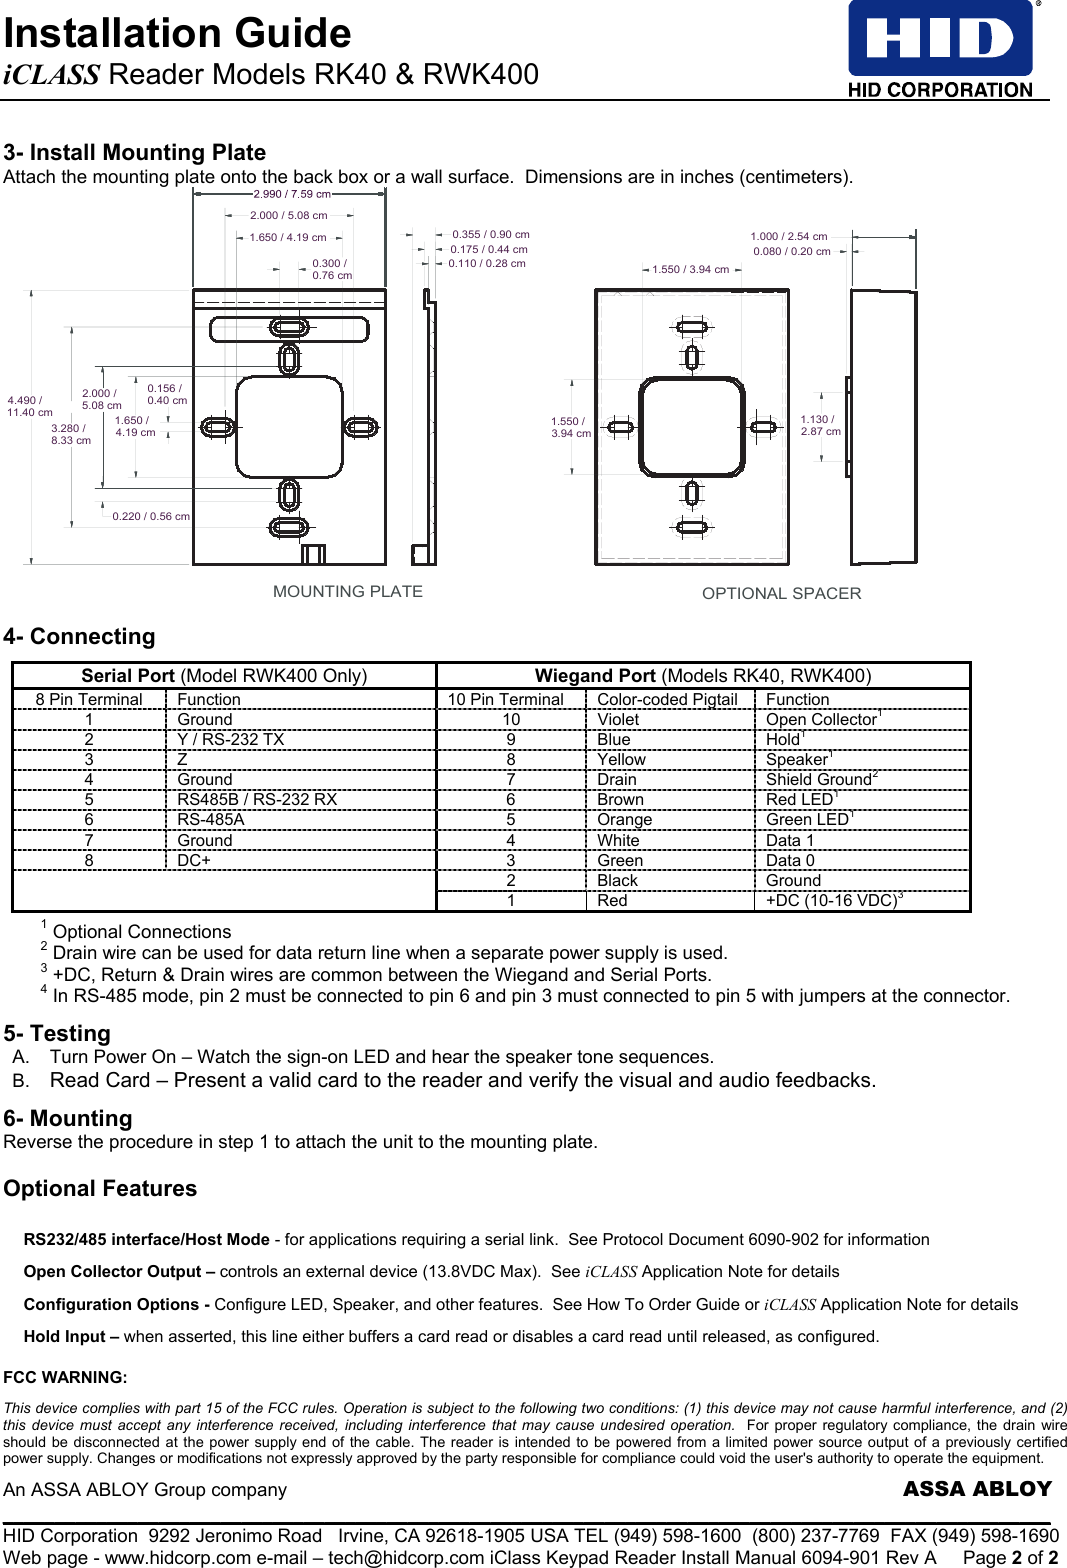 Installation Guide   iCLASS Reader Models RK40 &amp; RWK400                An ASSA ABLOY Group company                     ASSA ABLOY _____________________________________________________________________________________________________ HID Corporation  9292 Jeronimo Road   Irvine, CA 92618-1905 USA TEL (949) 598-1600  (800) 237-7769  FAX (949) 598-1690 Web page - www.hidcorp.com e-mail – tech@hidcorp.com iClass Keypad Reader Install Manual 6094-901 Rev A  Page 2 of 2 3- Install Mounting Plate Attach the mounting plate onto the back box or a wall surface.  Dimensions are in inches (centimeters). OPTIONAL SPACERMOUNTING PLATE0.156 /0.40 cm1.650 /4.19 cm2.000 /5.08 cm3.280 /8.33 cm0.220 / 0.56 cm0.300 /0.76 cm1.650 / 4.19 cm2.000 / 5.08 cm0.175 / 0.44 cm0.110 / 0.28 cm0.355 / 0.90 cm1.550 /3.94 cm1.550 / 3.94 cm1.130 /2.87 cm0.080 / 0.20 cm1.000 / 2.54 cm4.490 /11.40 cm 4- Connecting  Serial Port (Model RWK400 Only) Wiegand Port (Models RK40, RWK400) 8 Pin Terminal  Function  10 Pin Terminal Color-coded Pigtail Function 1 Ground  10 Violet  Open Collector1 2  Y / RS-232 TX  9  Blue  Hold1 3 Z  8 Yellow  Speaker1 4 Ground  7 Drain  Shield Ground2 5  RS485B / RS-232 RX  6  Brown  Red LED1 6 RS-485A  5 Orange  Green LED1 7 Ground  4 White  Data 1 8 DC+  3 Green  Data 0 2 Black  Ground  1  Red  +DC (10-16 VDC)3  1 Optional Connections  2 Drain wire can be used for data return line when a separate power supply is used. 3 +DC, Return &amp; Drain wires are common between the Wiegand and Serial Ports.      4 In RS-485 mode, pin 2 must be connected to pin 6 and pin 3 must connected to pin 5 with jumpers at the connector. 5- Testing A.  Turn Power On – Watch the sign-on LED and hear the speaker tone sequences. B.  Read Card – Present a valid card to the reader and verify the visual and audio feedbacks. 6- Mounting  Reverse the procedure in step 1 to attach the unit to the mounting plate.  Optional Features  FCC WARNING:  This device complies with part 15 of the FCC rules. Operation is subject to the following two conditions: (1) this device may not cause harmful interference, and (2) this device must accept any interference received, including interference that may cause undesired operation.  For proper regulatory compliance, the drain wire should be disconnected at the power supply end of the cable. The reader is intended to be powered from a limited power source output of a previously certified power supply. Changes or modifications not expressly approved by the party responsible for compliance could void the user&apos;s authority to operate the equipment. RS232/485 interface/Host Mode - for applications requiring a serial link.  See Protocol Document 6090-902 for information Open Collector Output – controls an external device (13.8VDC Max).  See iCLASS Application Note for details Configuration Options - Configure LED, Speaker, and other features.  See How To Order Guide or iCLASS Application Note for details Hold Input – when asserted, this line either buffers a card read or disables a card read until released, as configured. 